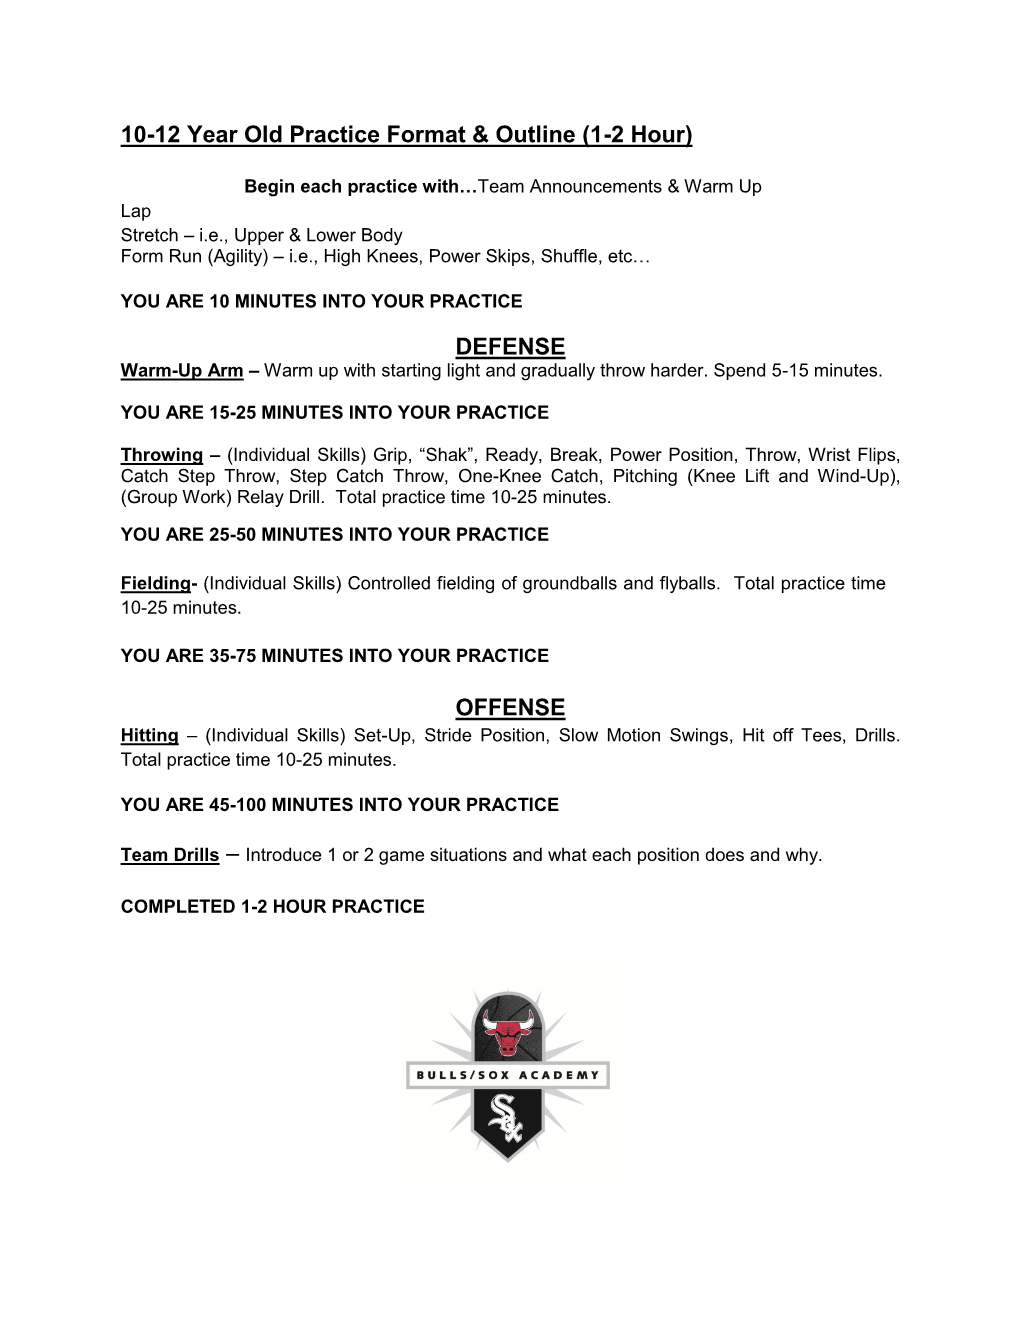 10-12 Year Old Practice Format & Outline (1-2 Hour) DEFENSE